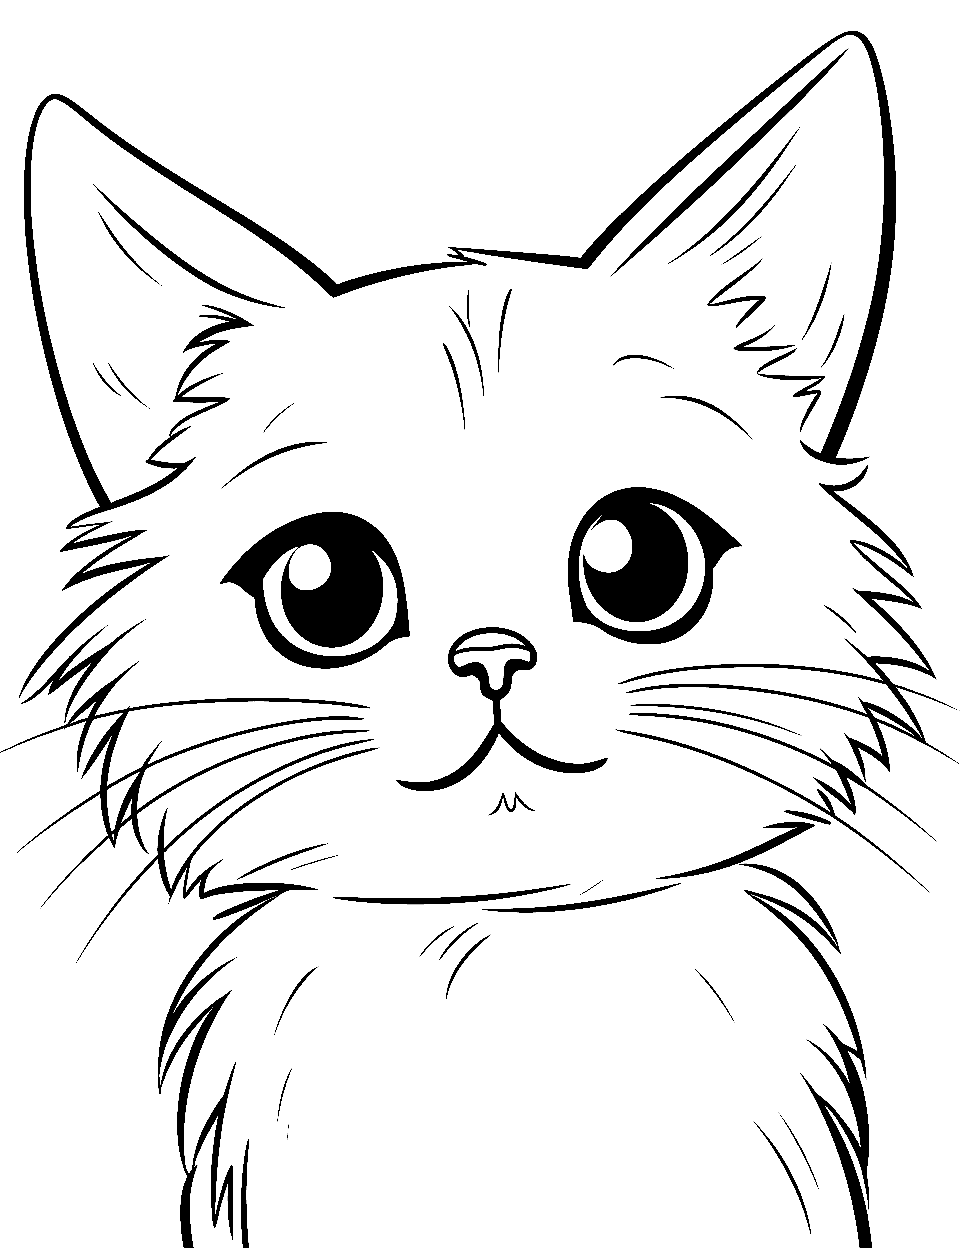 Kitty's Whisker Twitch Kitten Coloring Page - Close-up of a kitten’s face, with twitching whiskers.